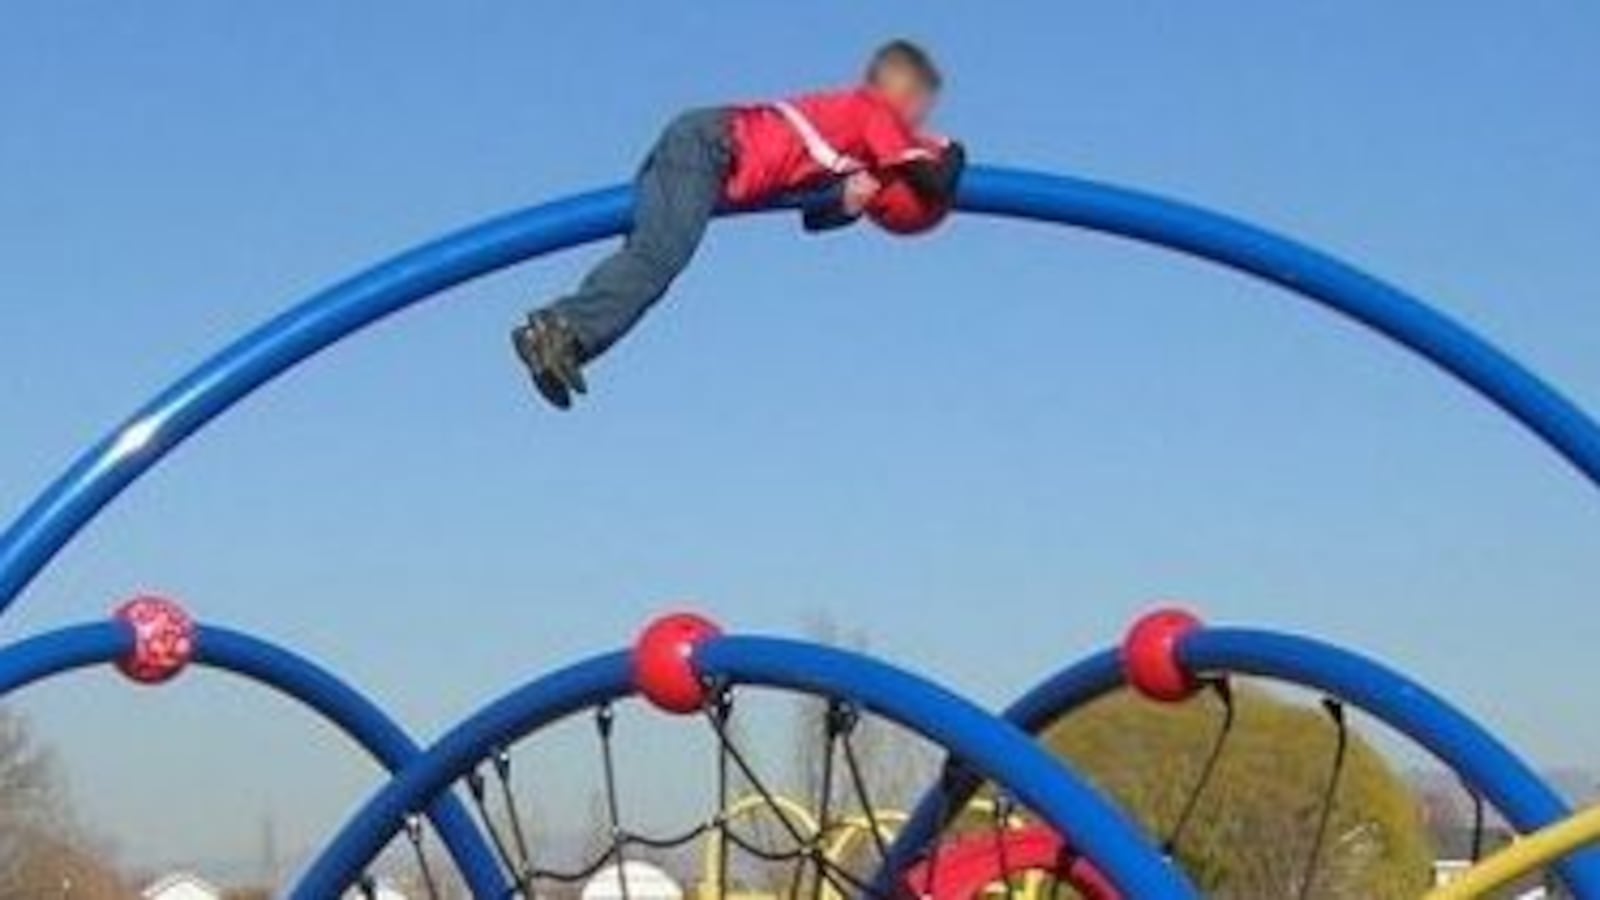 Every year, about 120 Colorado children are hospitalized because of falls from playground equipment. All photos from Tom Peeples.